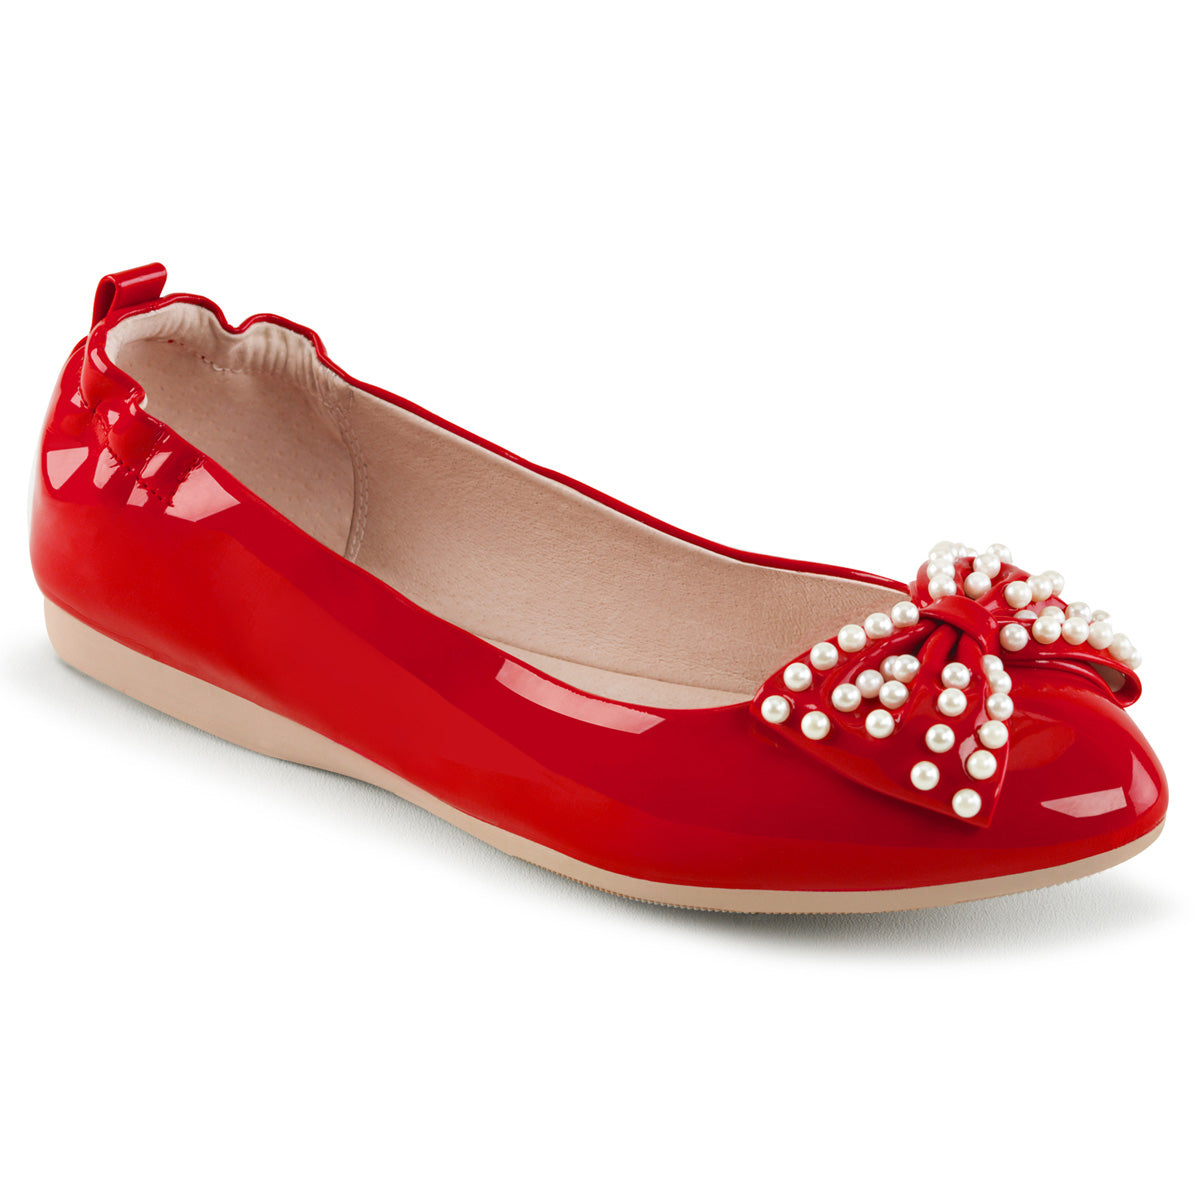 IVY-09 Red Patent